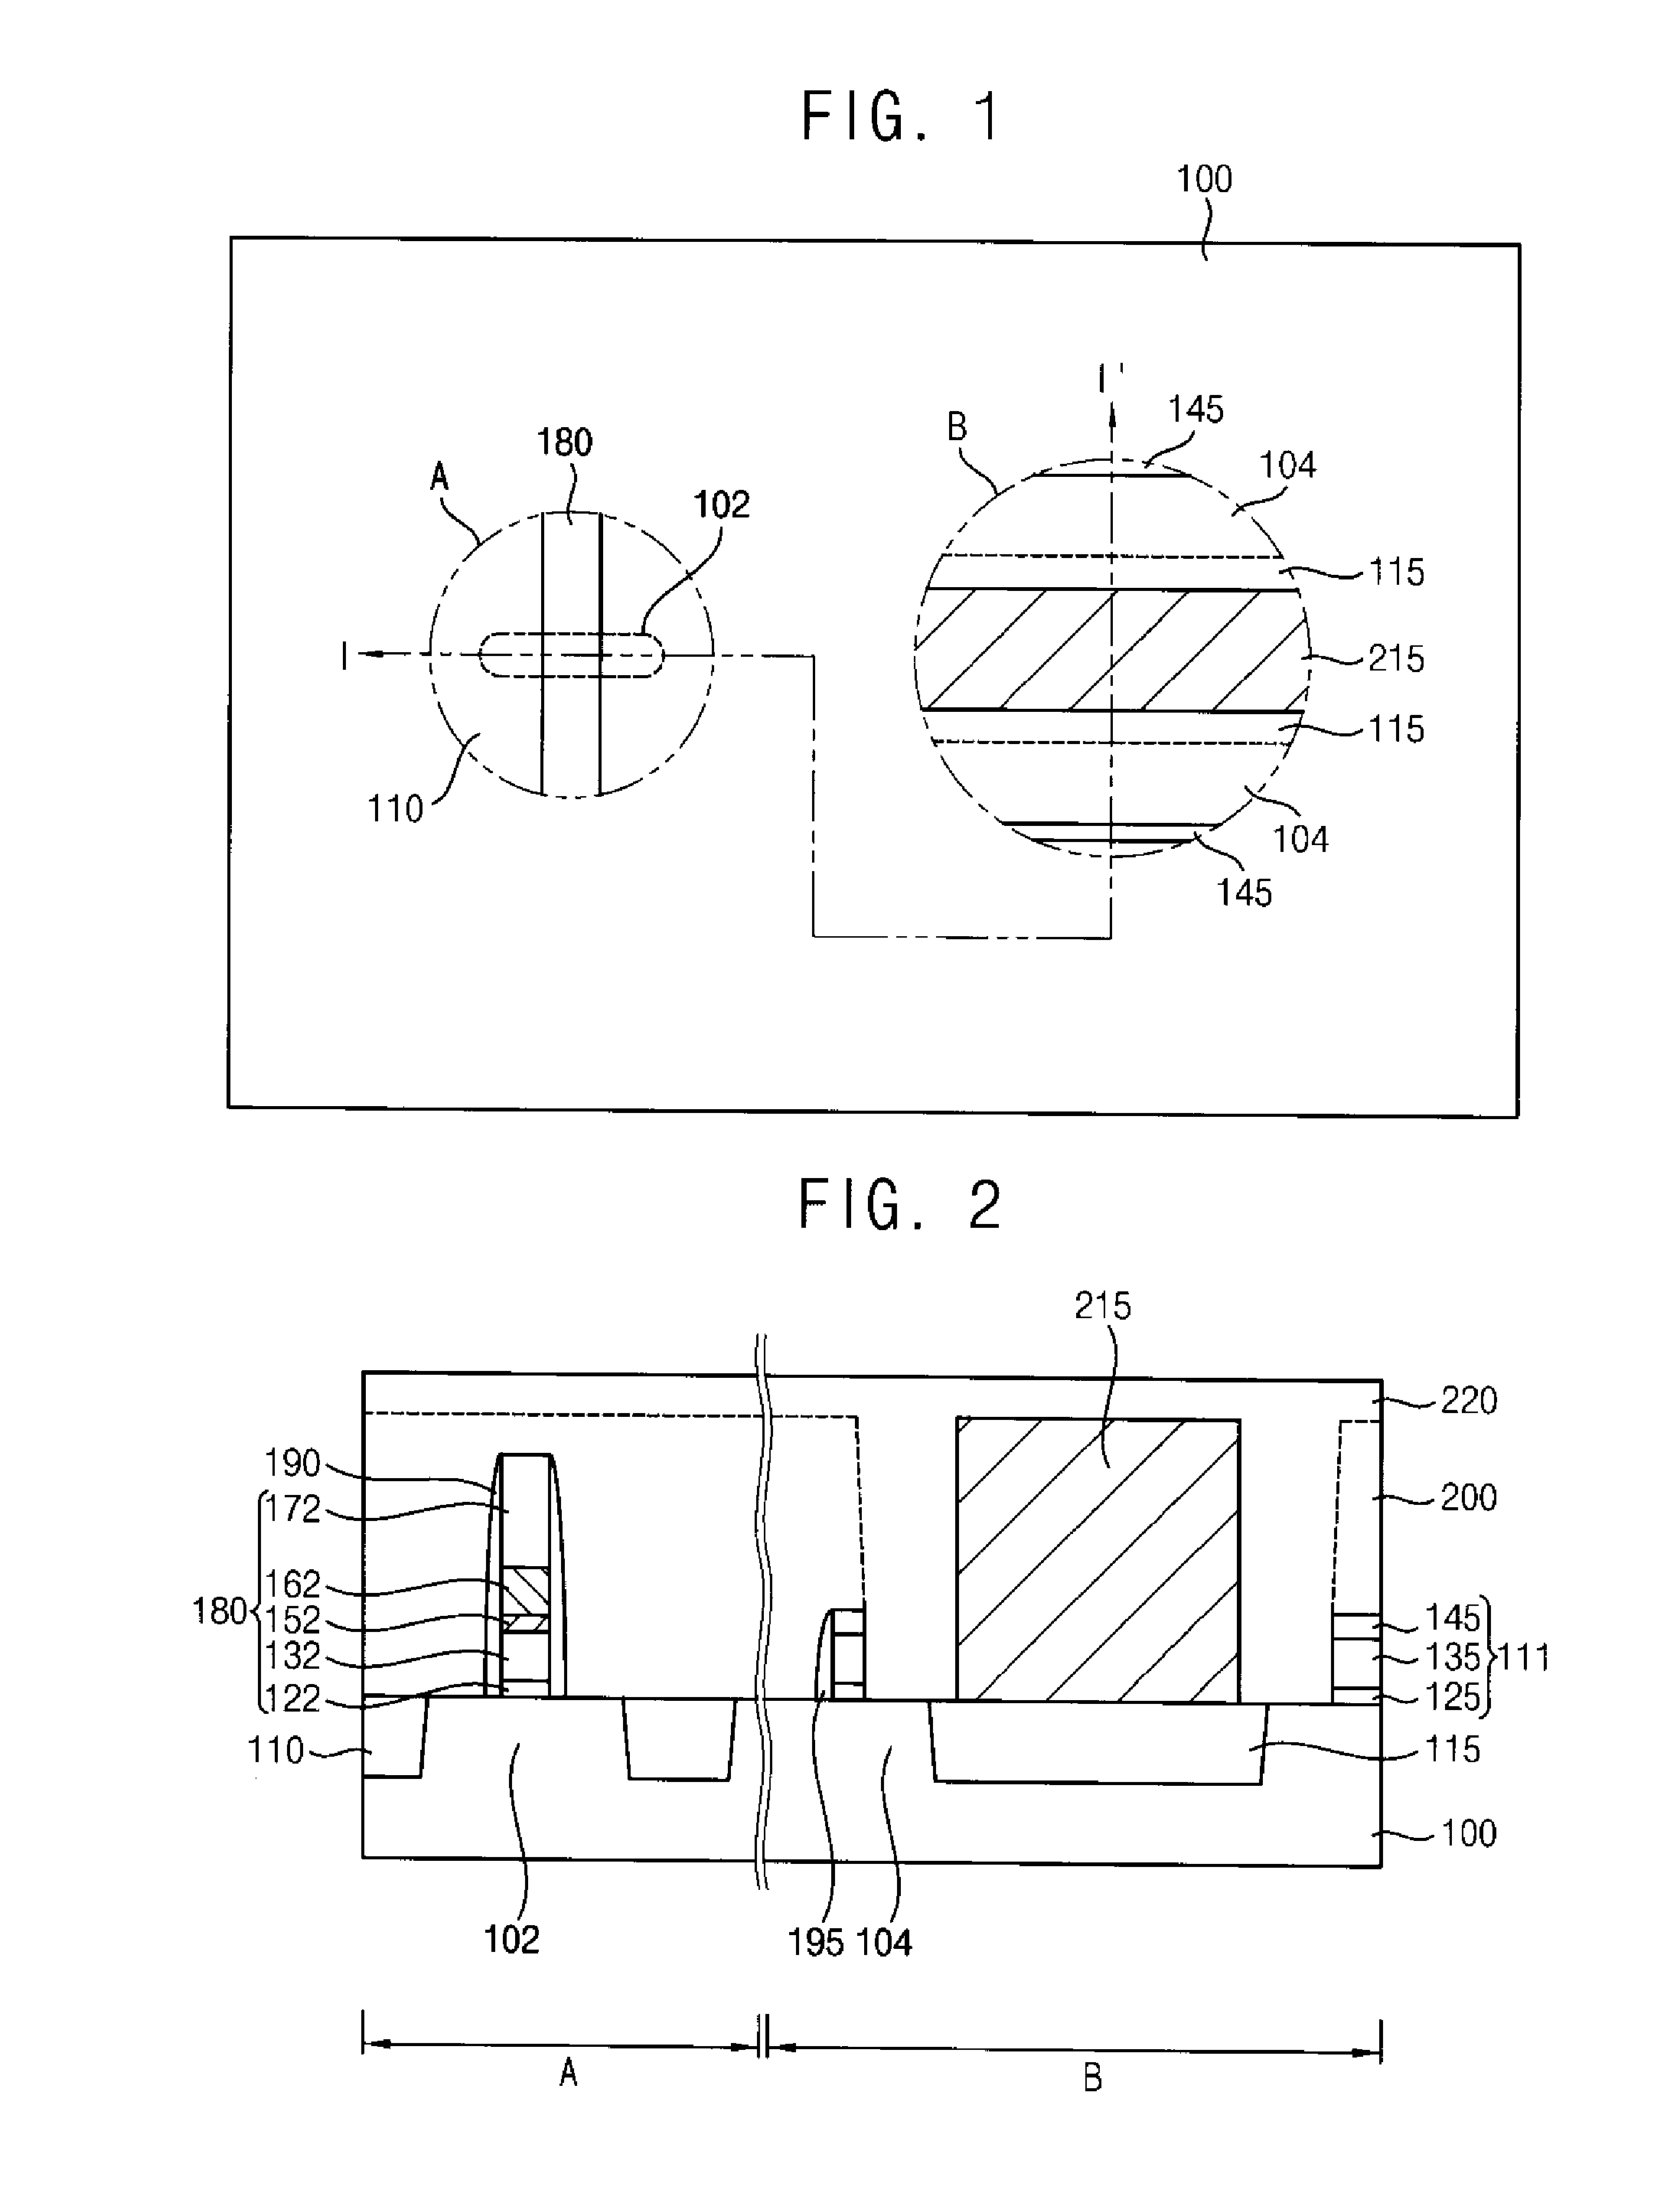 Semiconductor apparatus including an optical device and an electronic device, and method of manufacturing the same